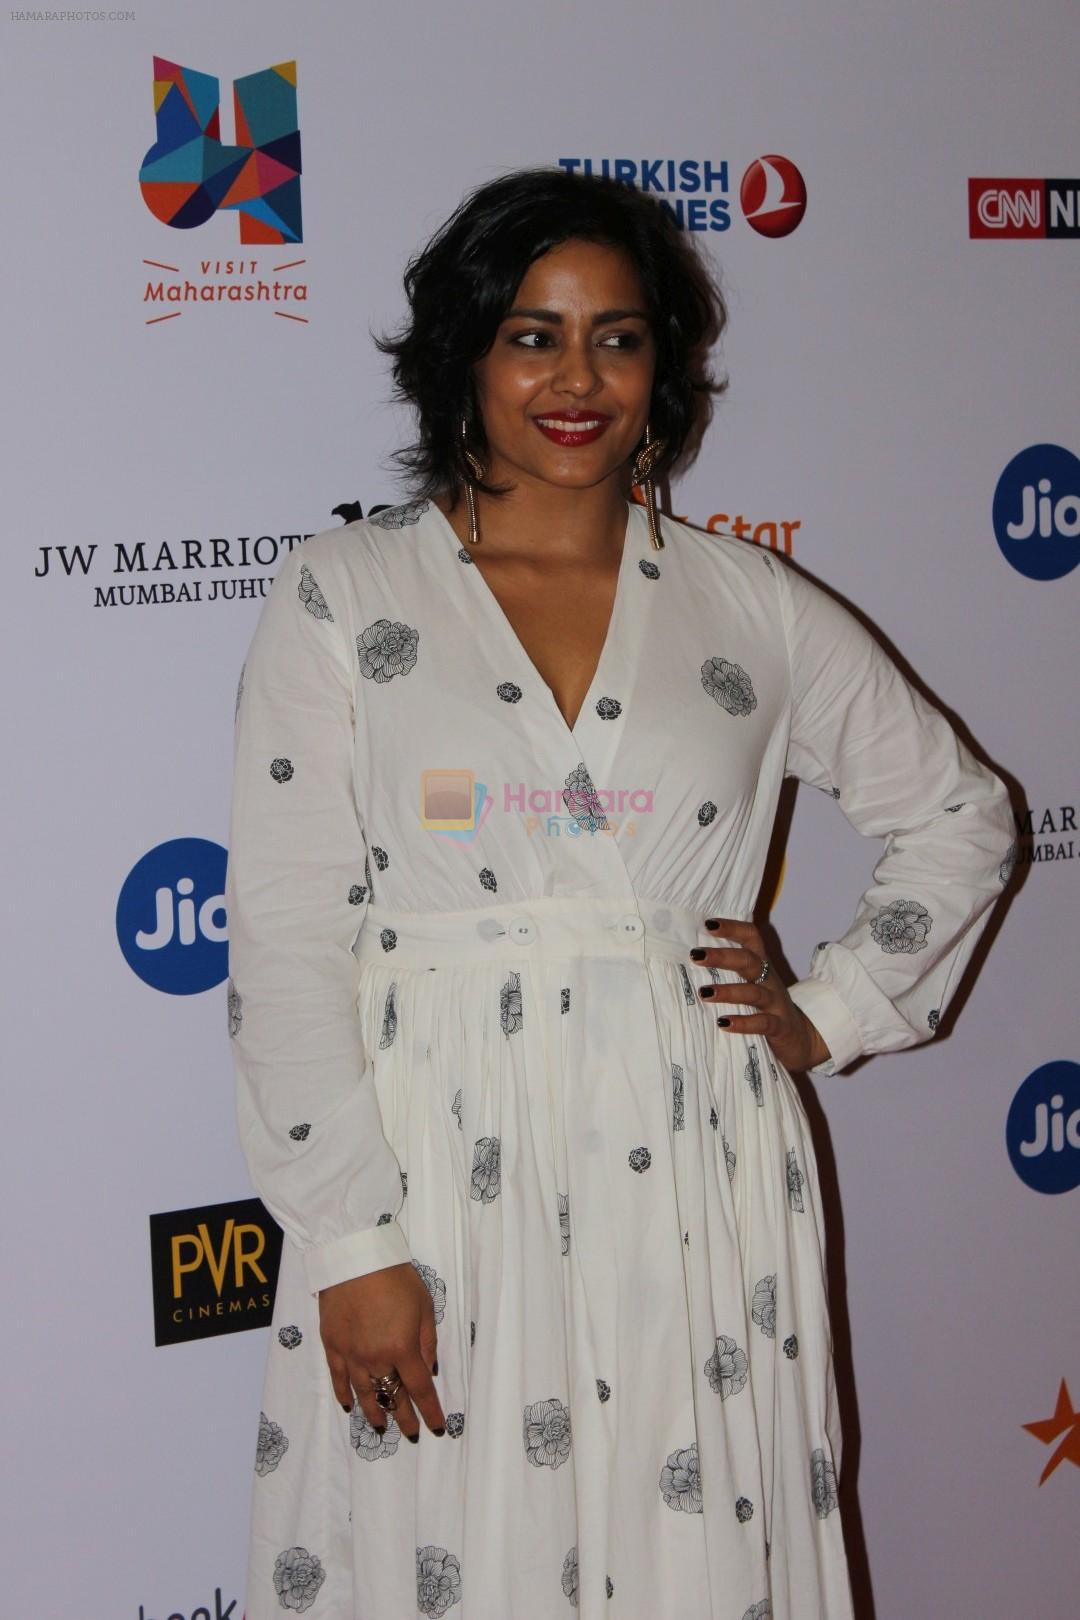 Shahana Goswami at Manoj Bajpai 's First International Project In The Shadows To Be Screened At Mami Festival on 16th Oct 2017